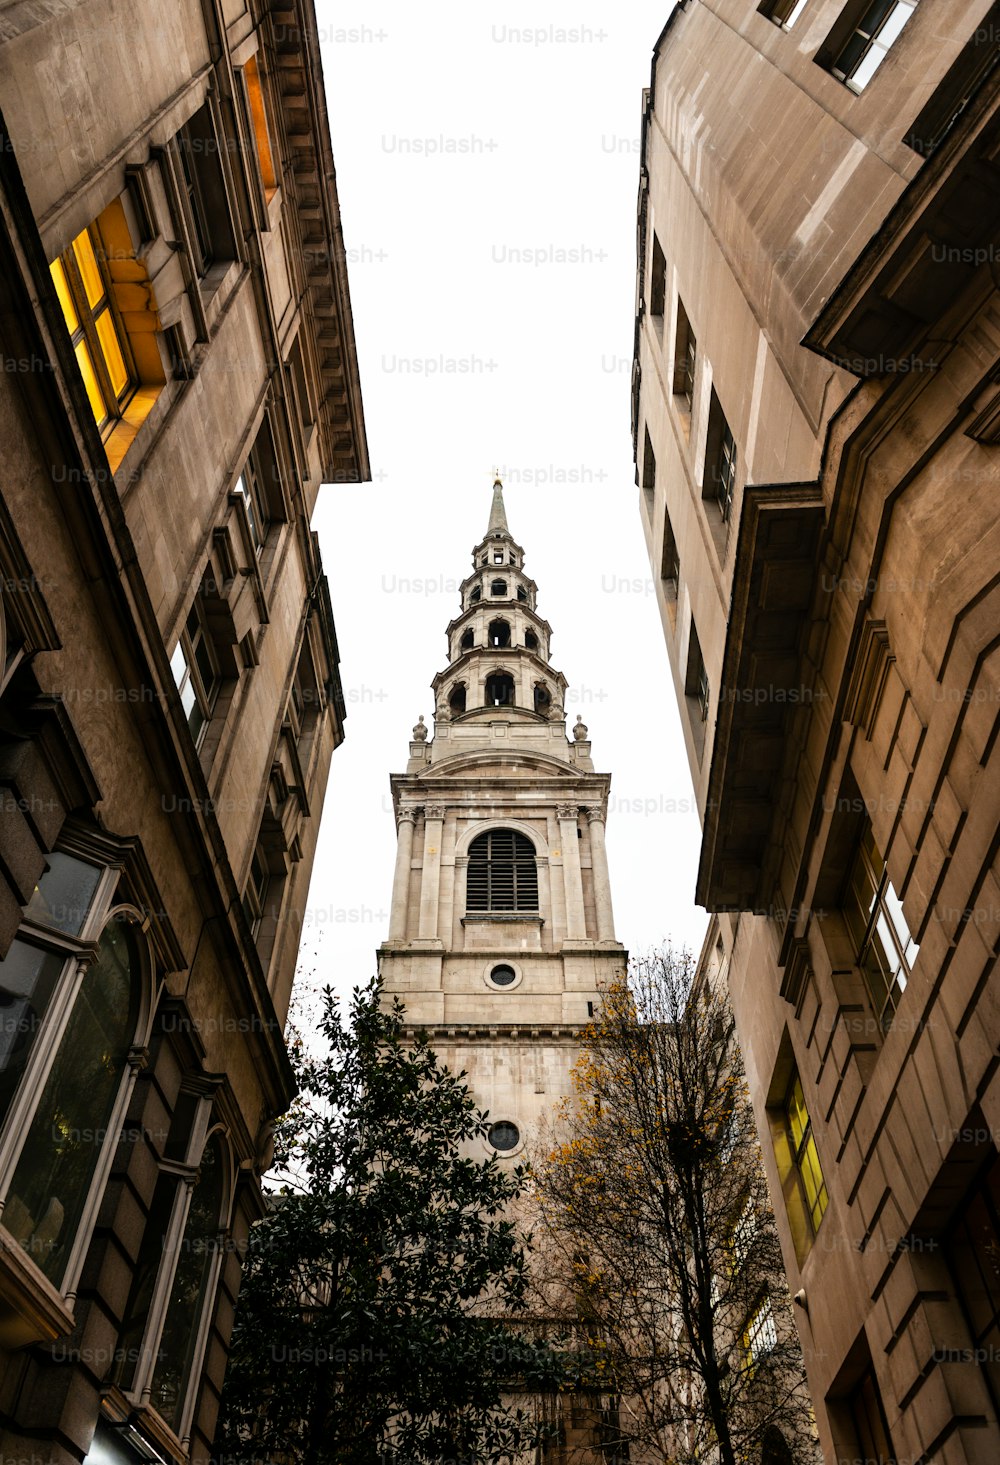 Tower of St Bride’s Church, one of the most ancient churches in London, as seen through a narrow street.